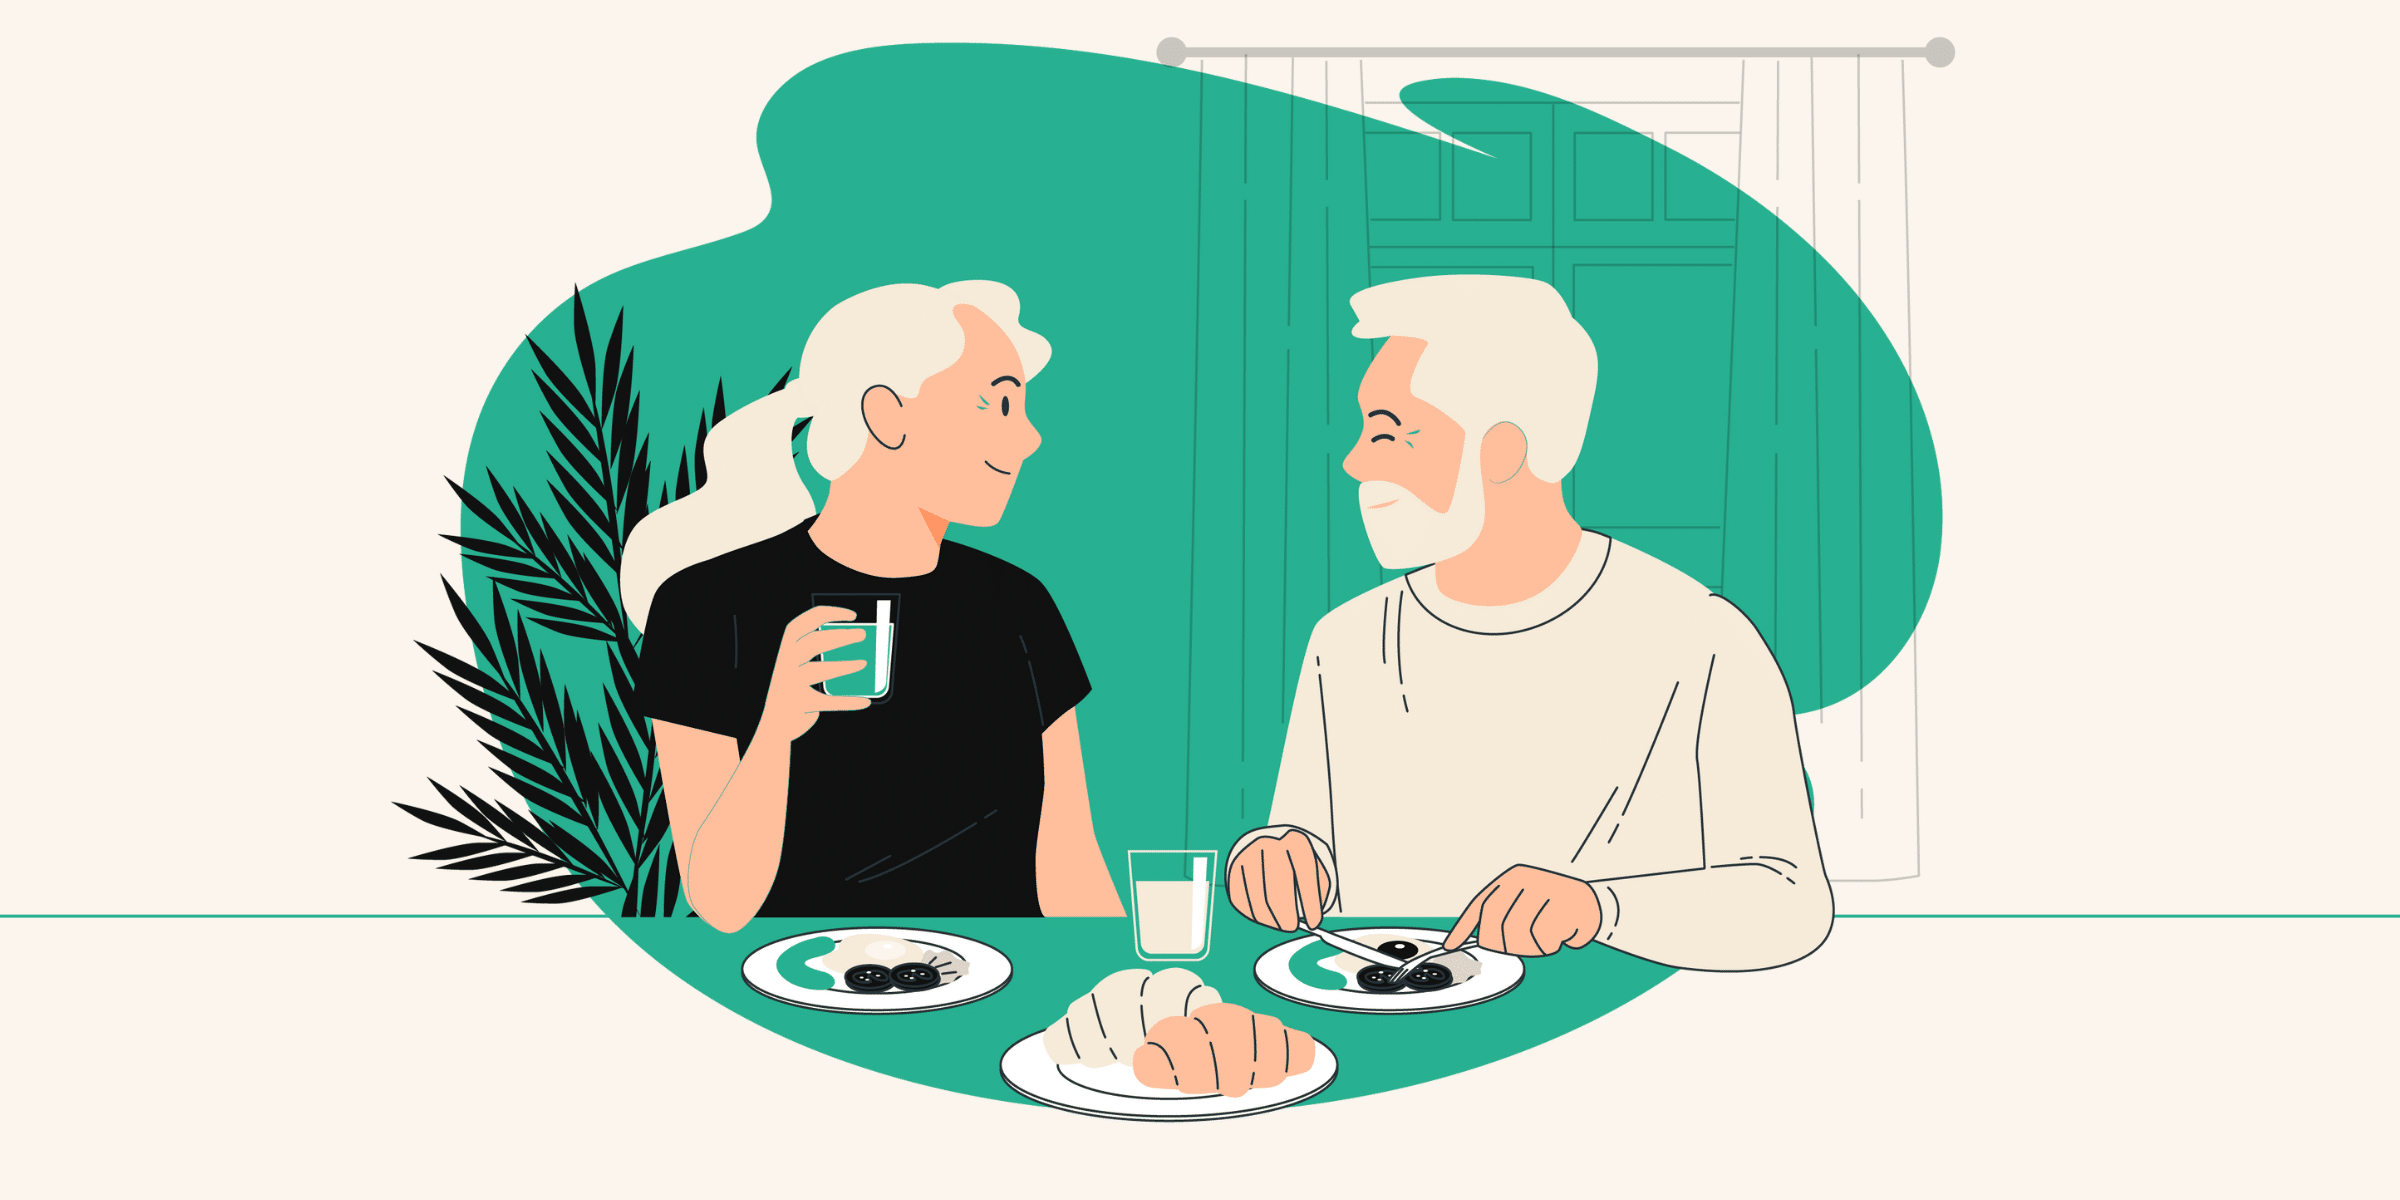 Dating over 50? Check out our guide with the best tips for dating over 50 to help you find your best match!